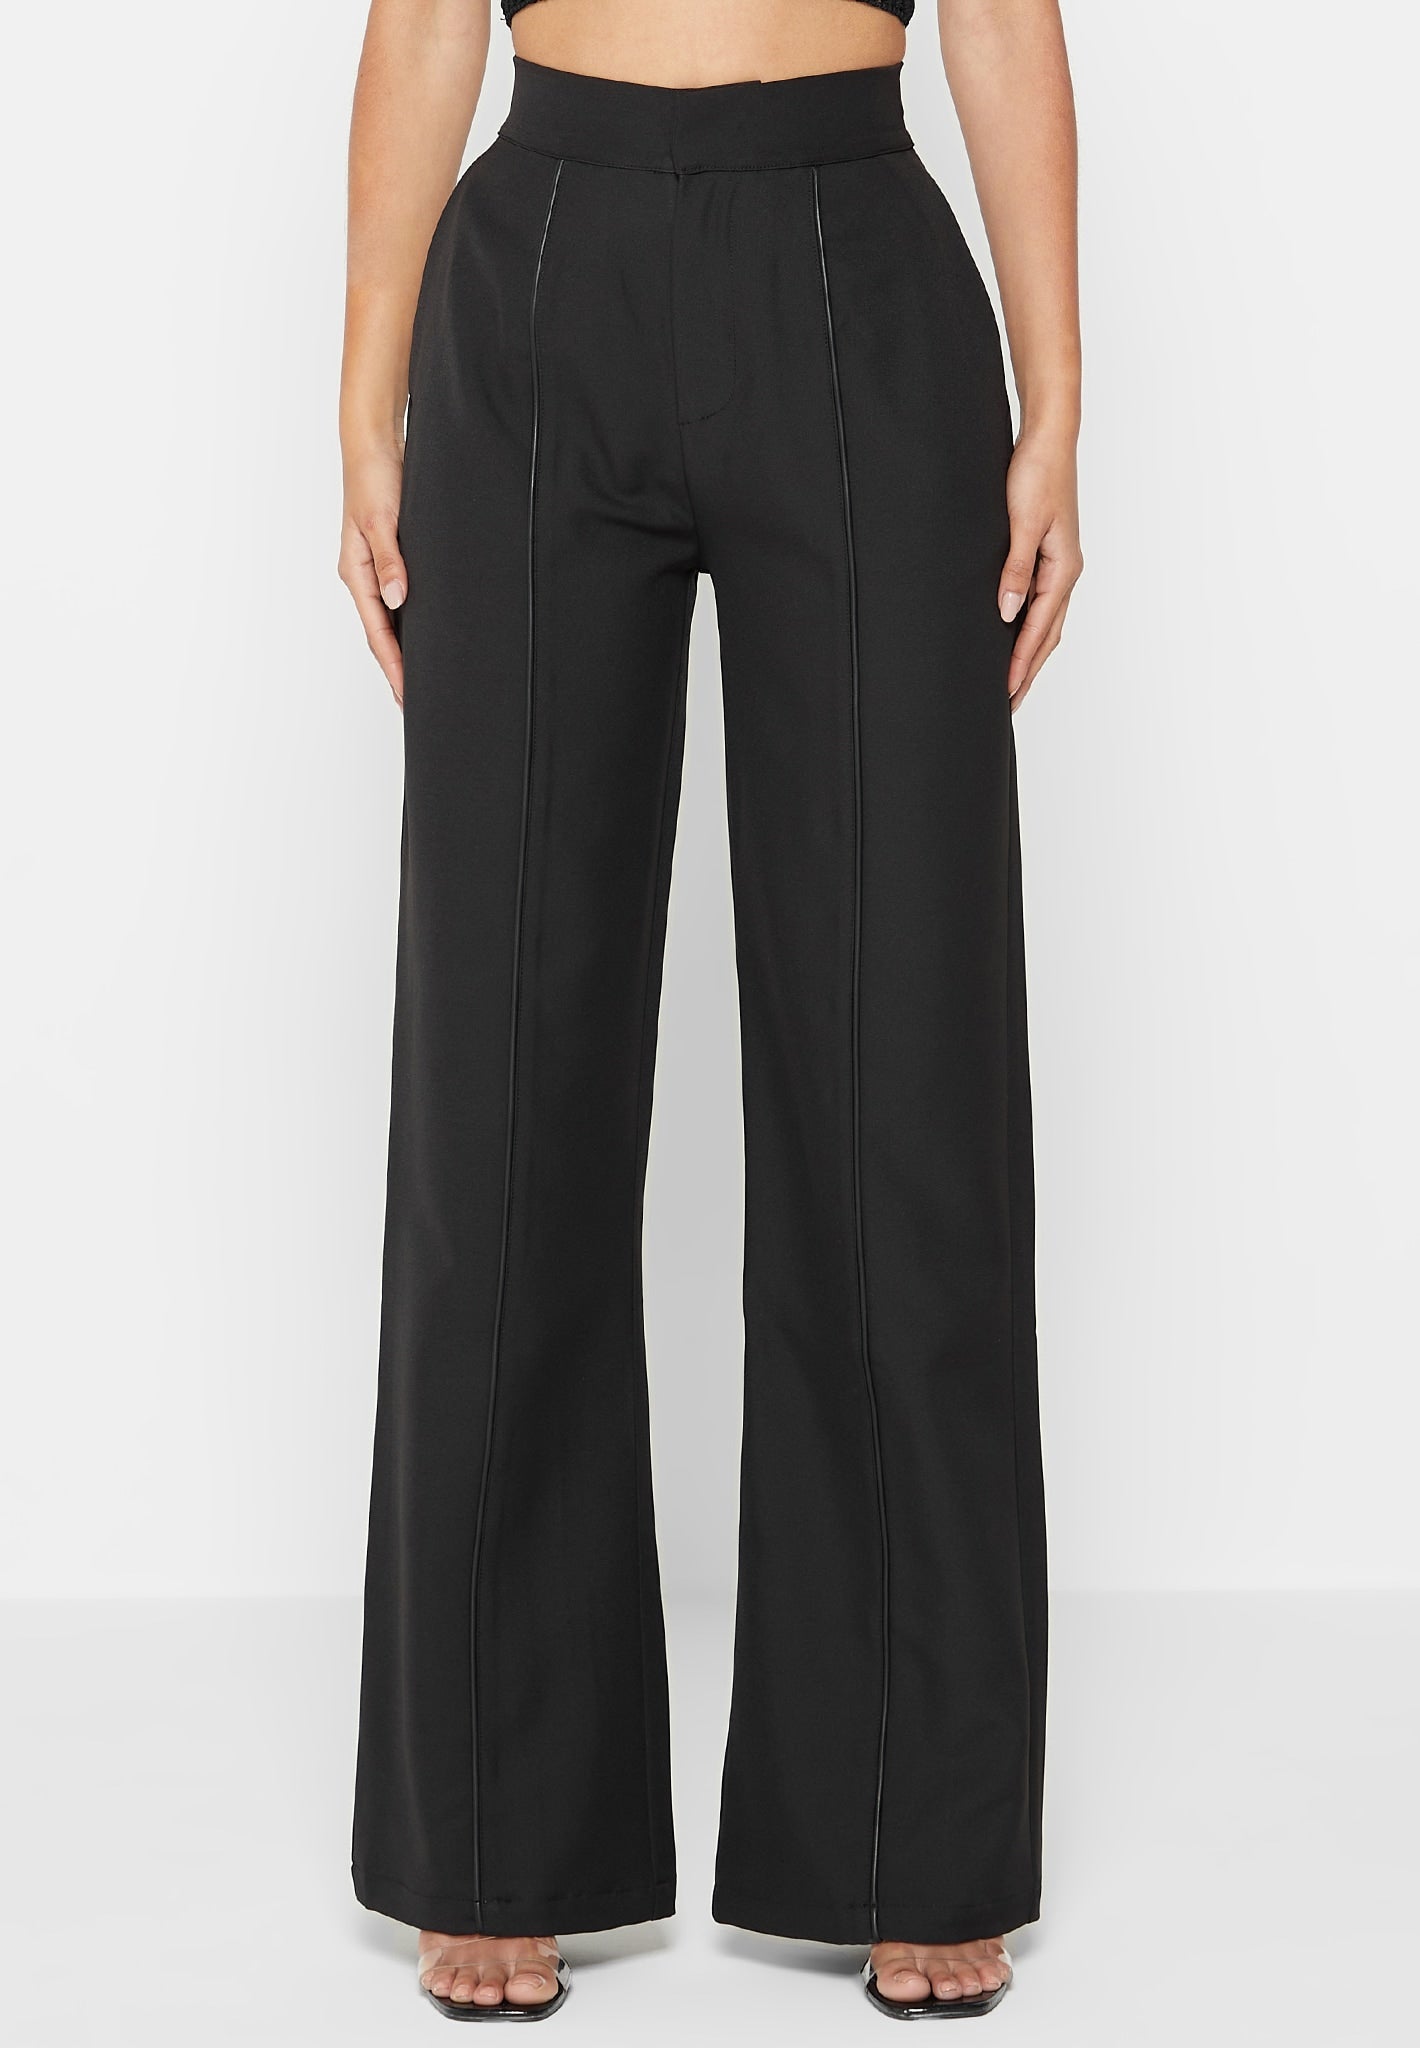 Black Pin Tuck High Waisted Flared Trouser